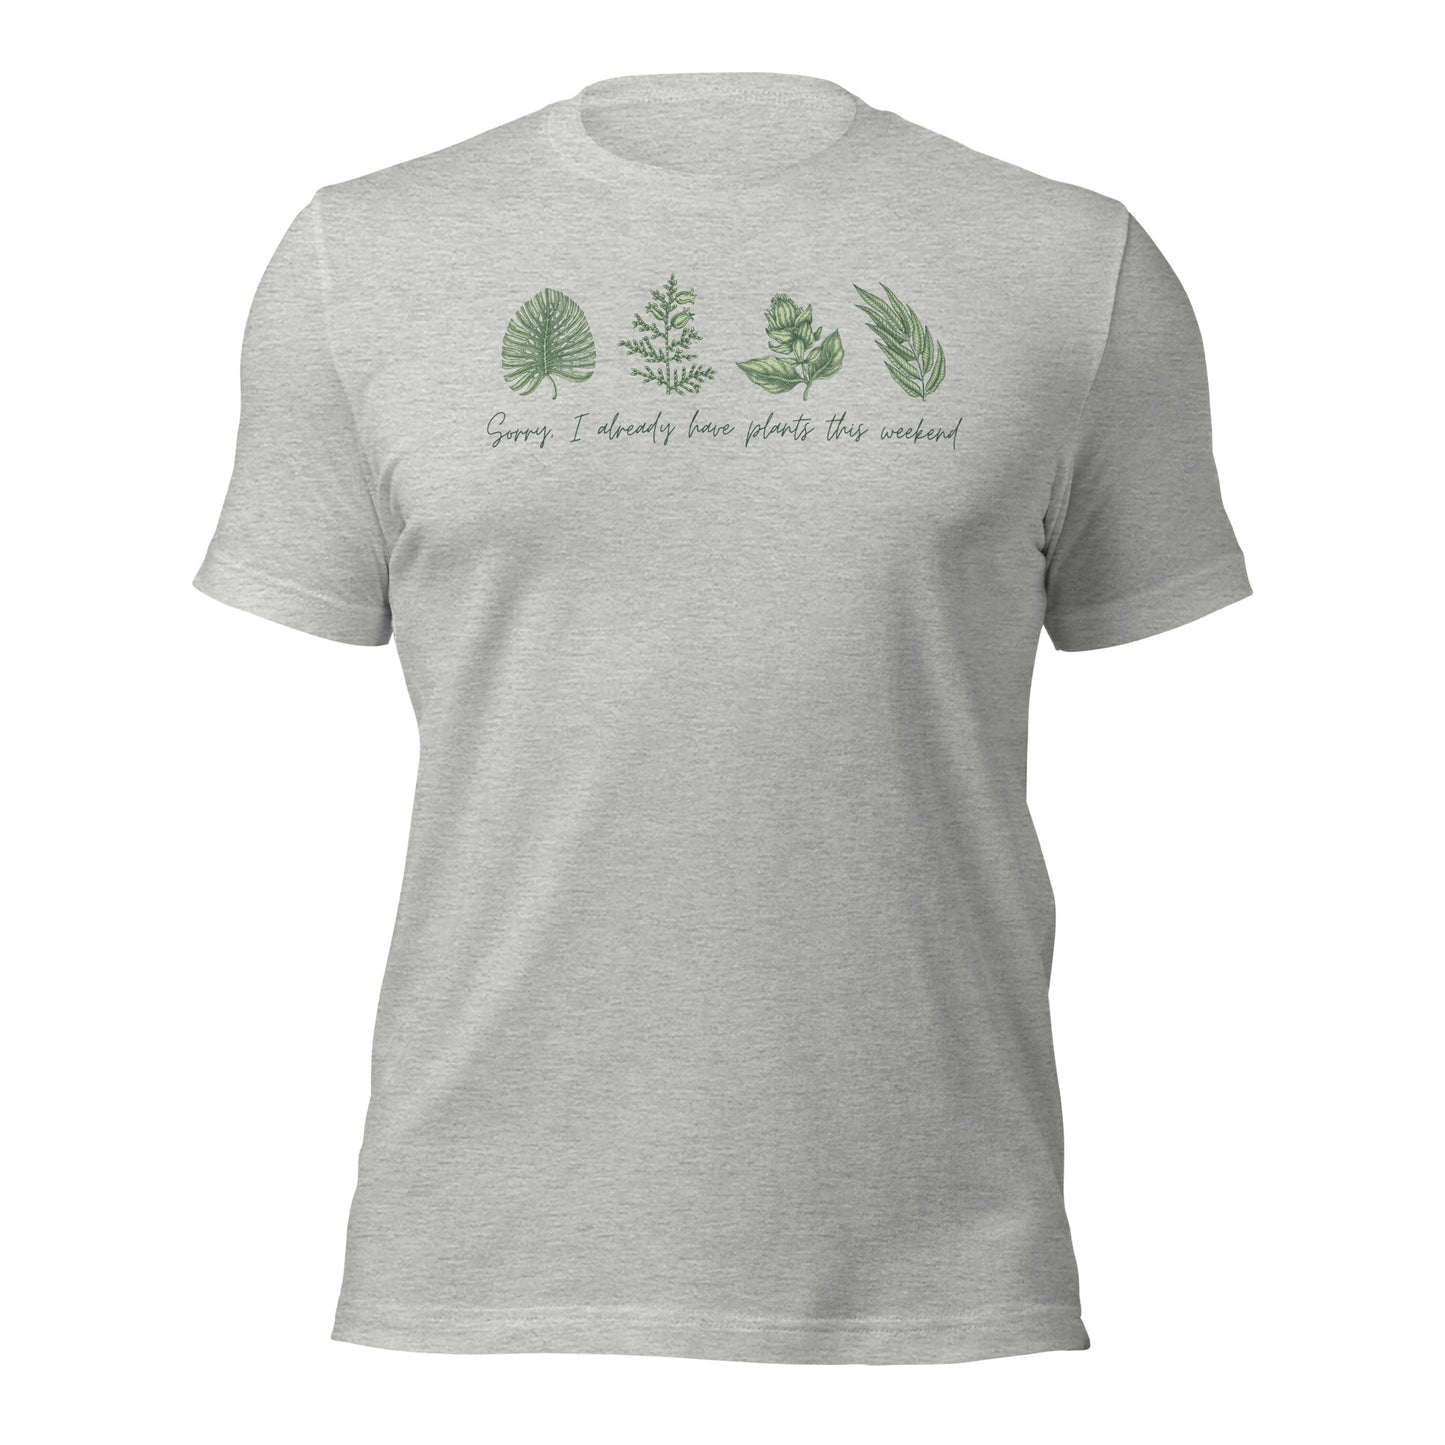 Plant Shirt Funny Plant Tee Sorry I Already Have Plants This Weekend Shirt